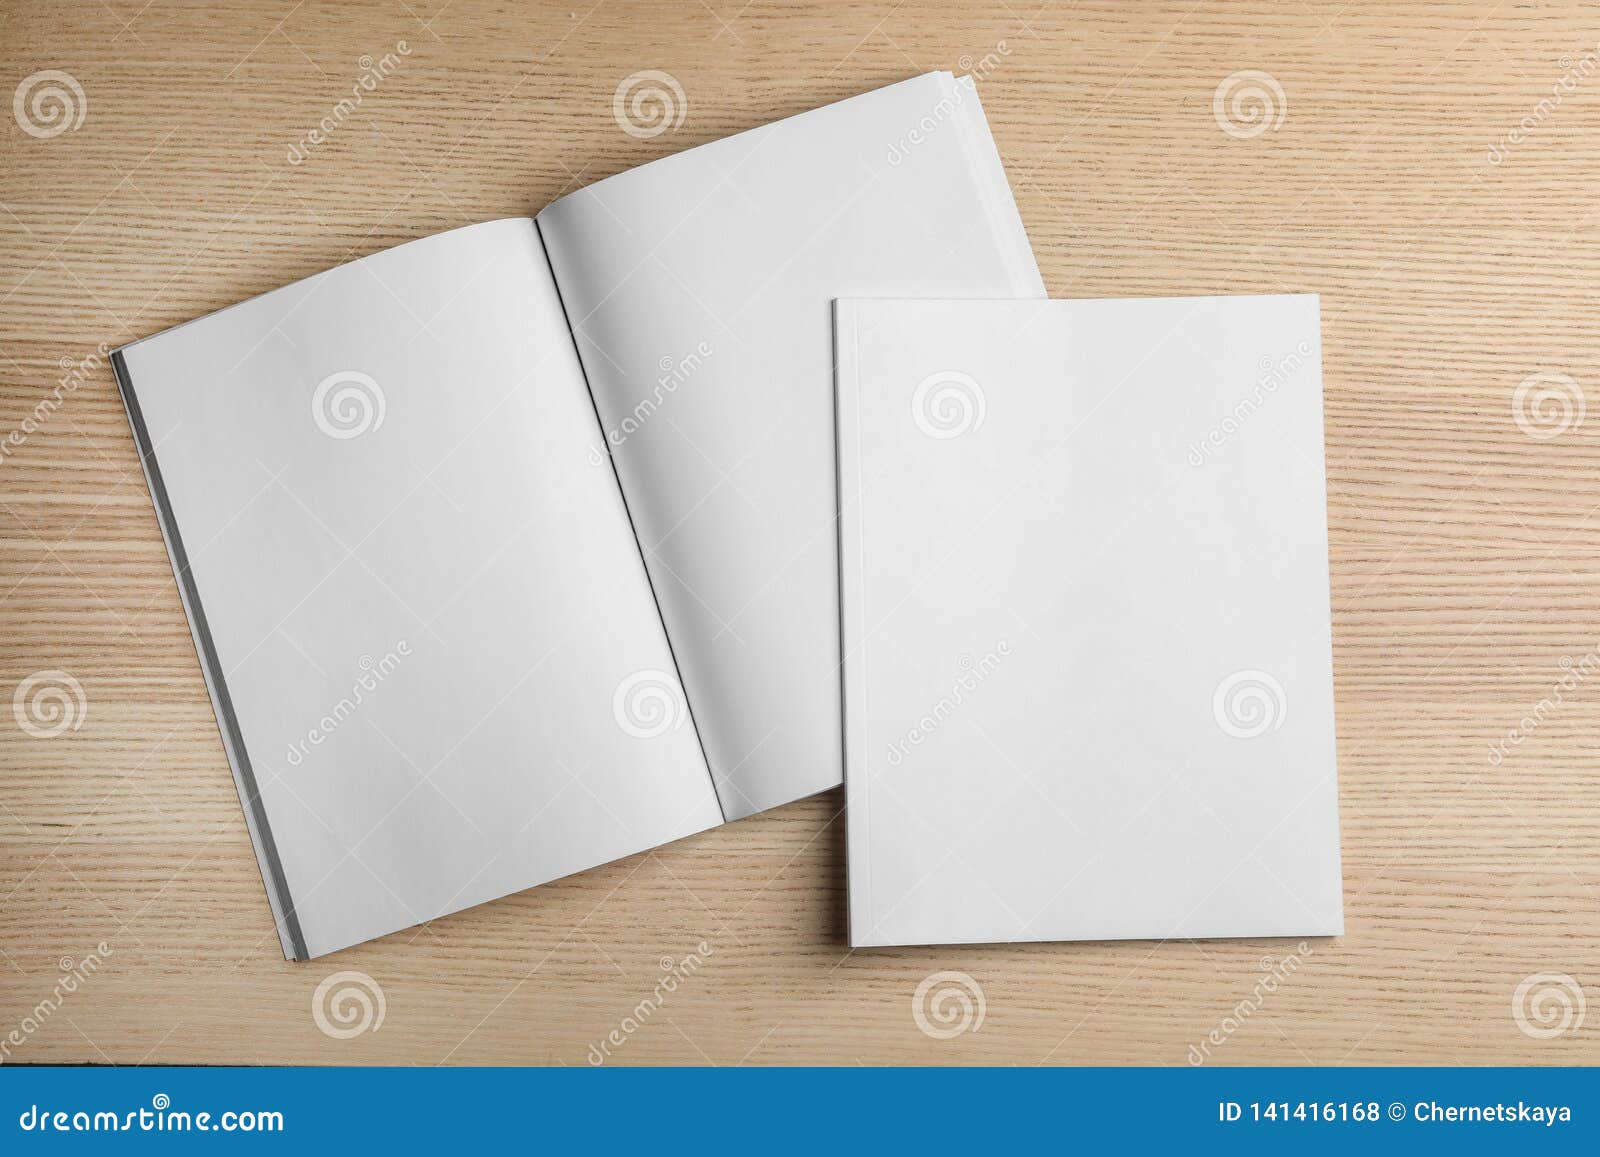 open and closed blank brochures on wooden background, top view.